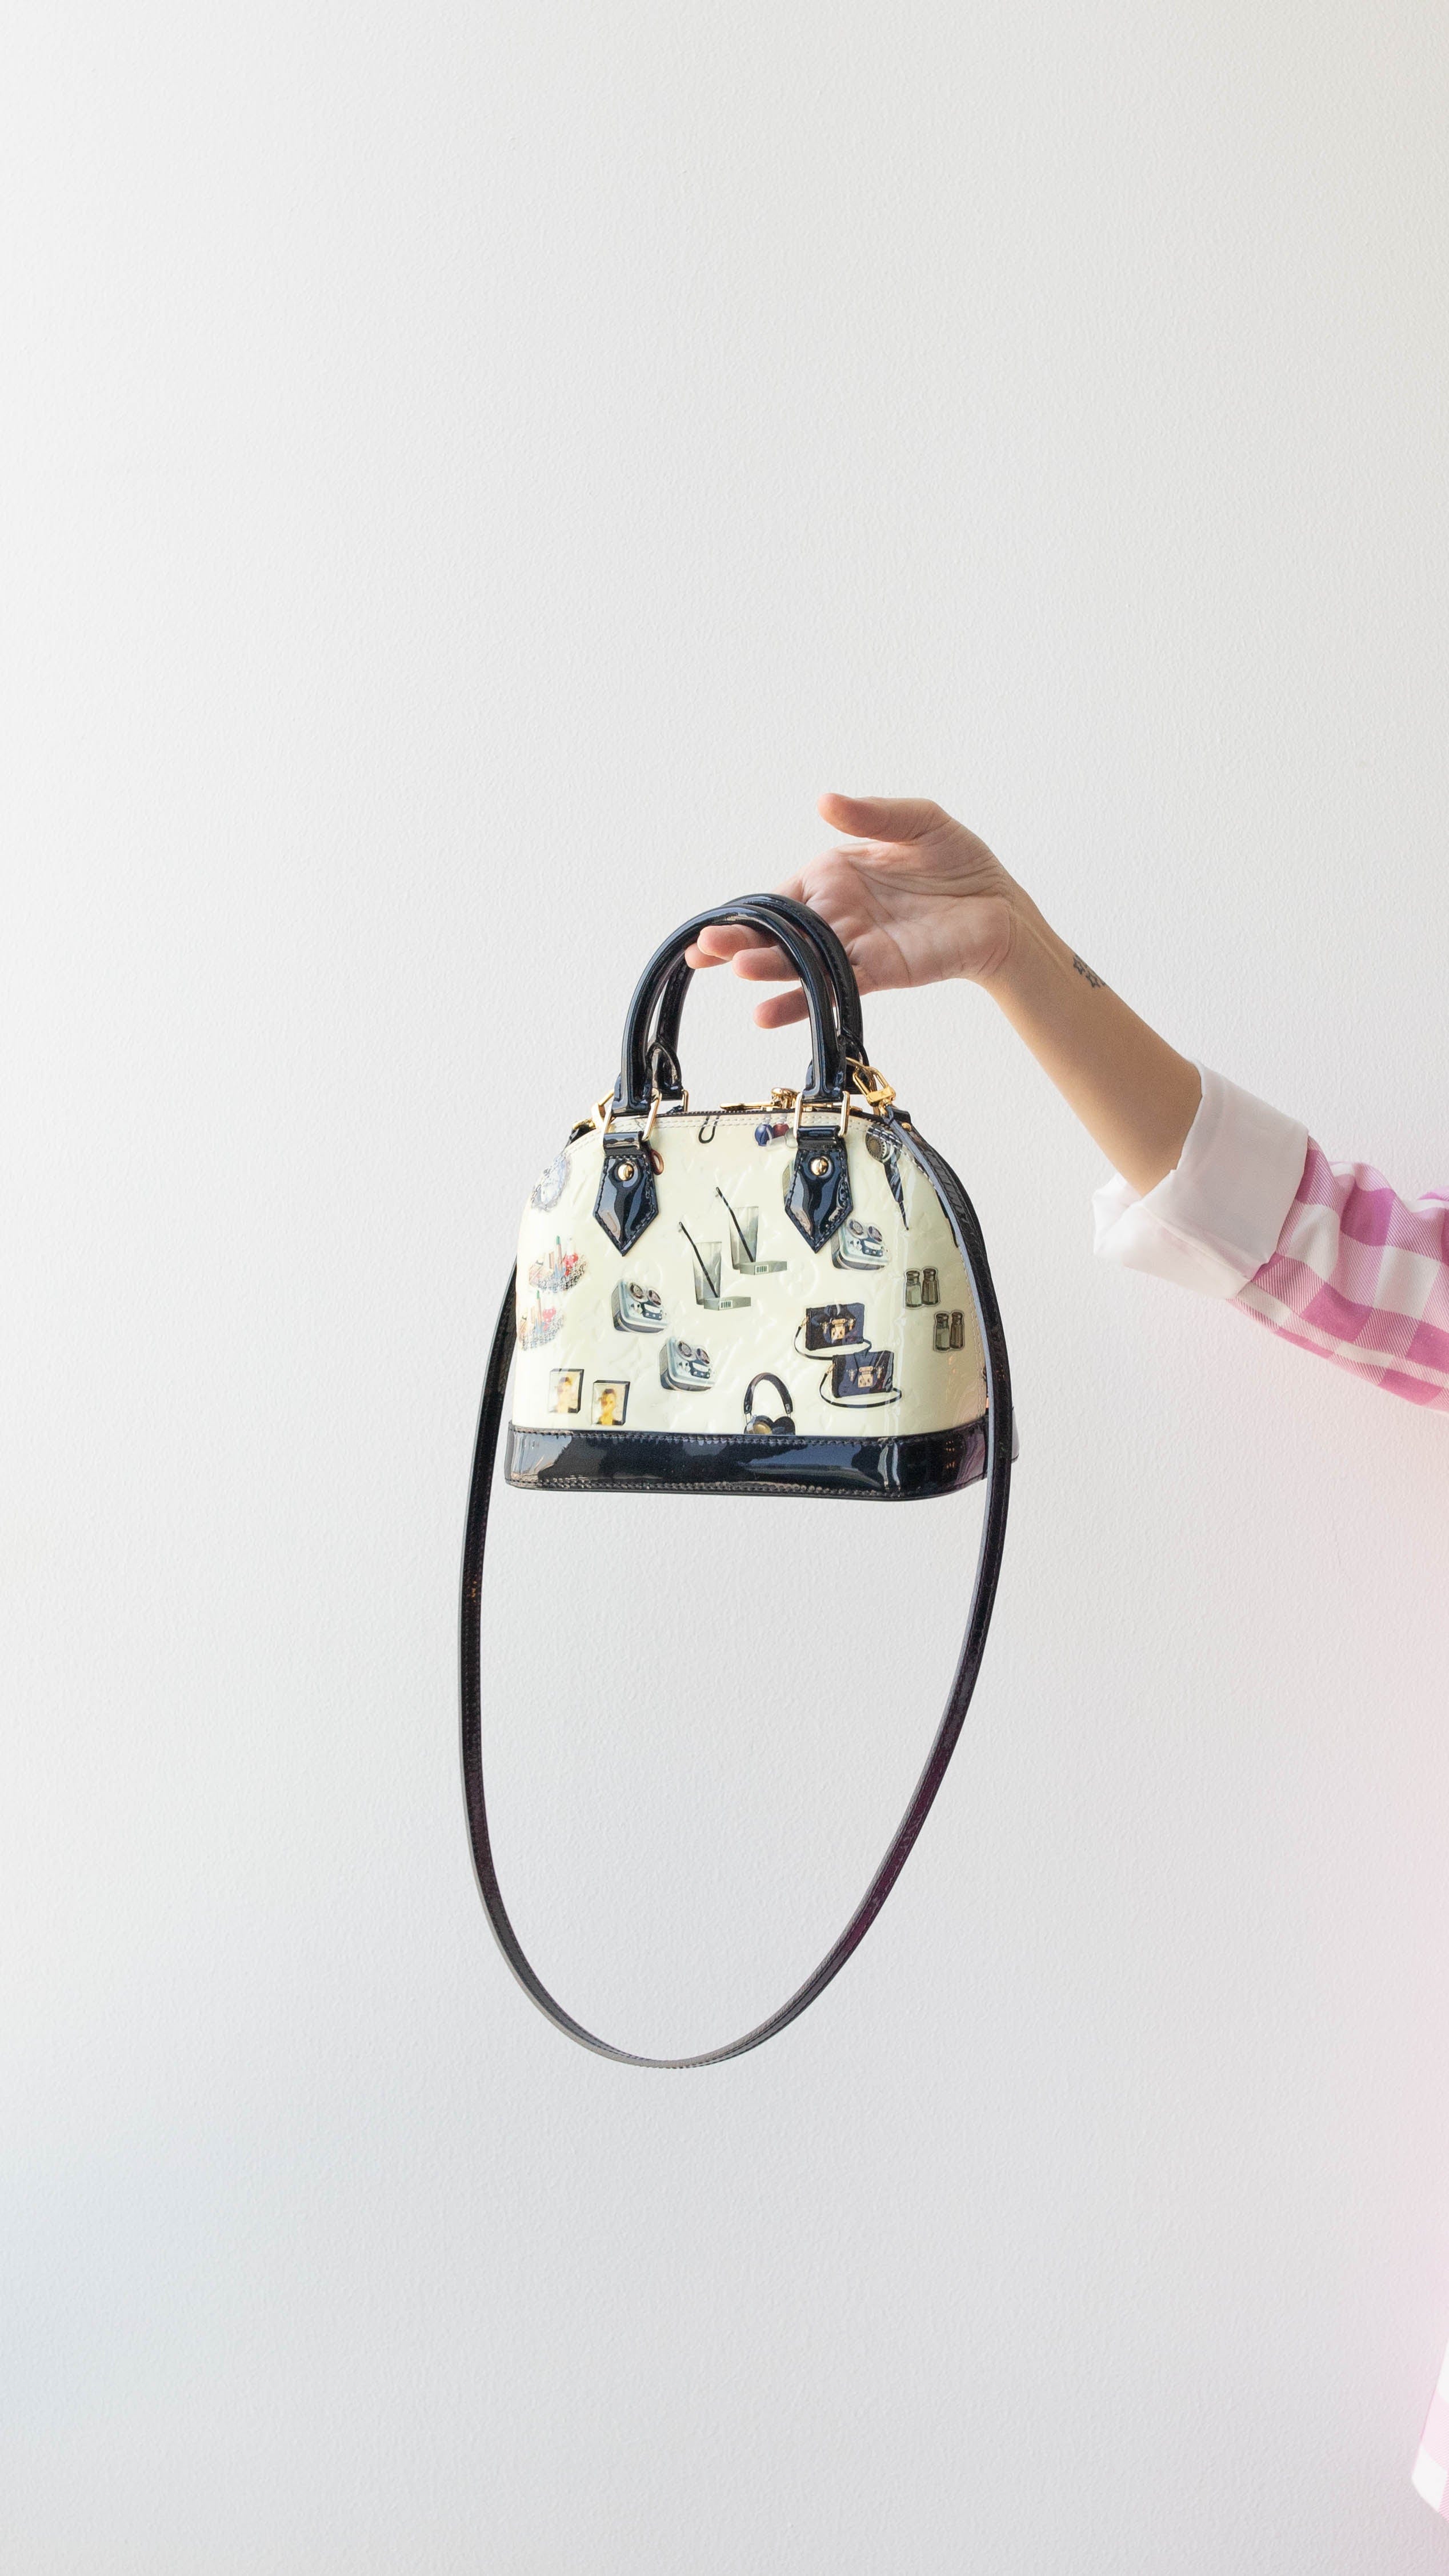 How to clean a Louis Vuitton bag and keep it in pristine condition - miss mv